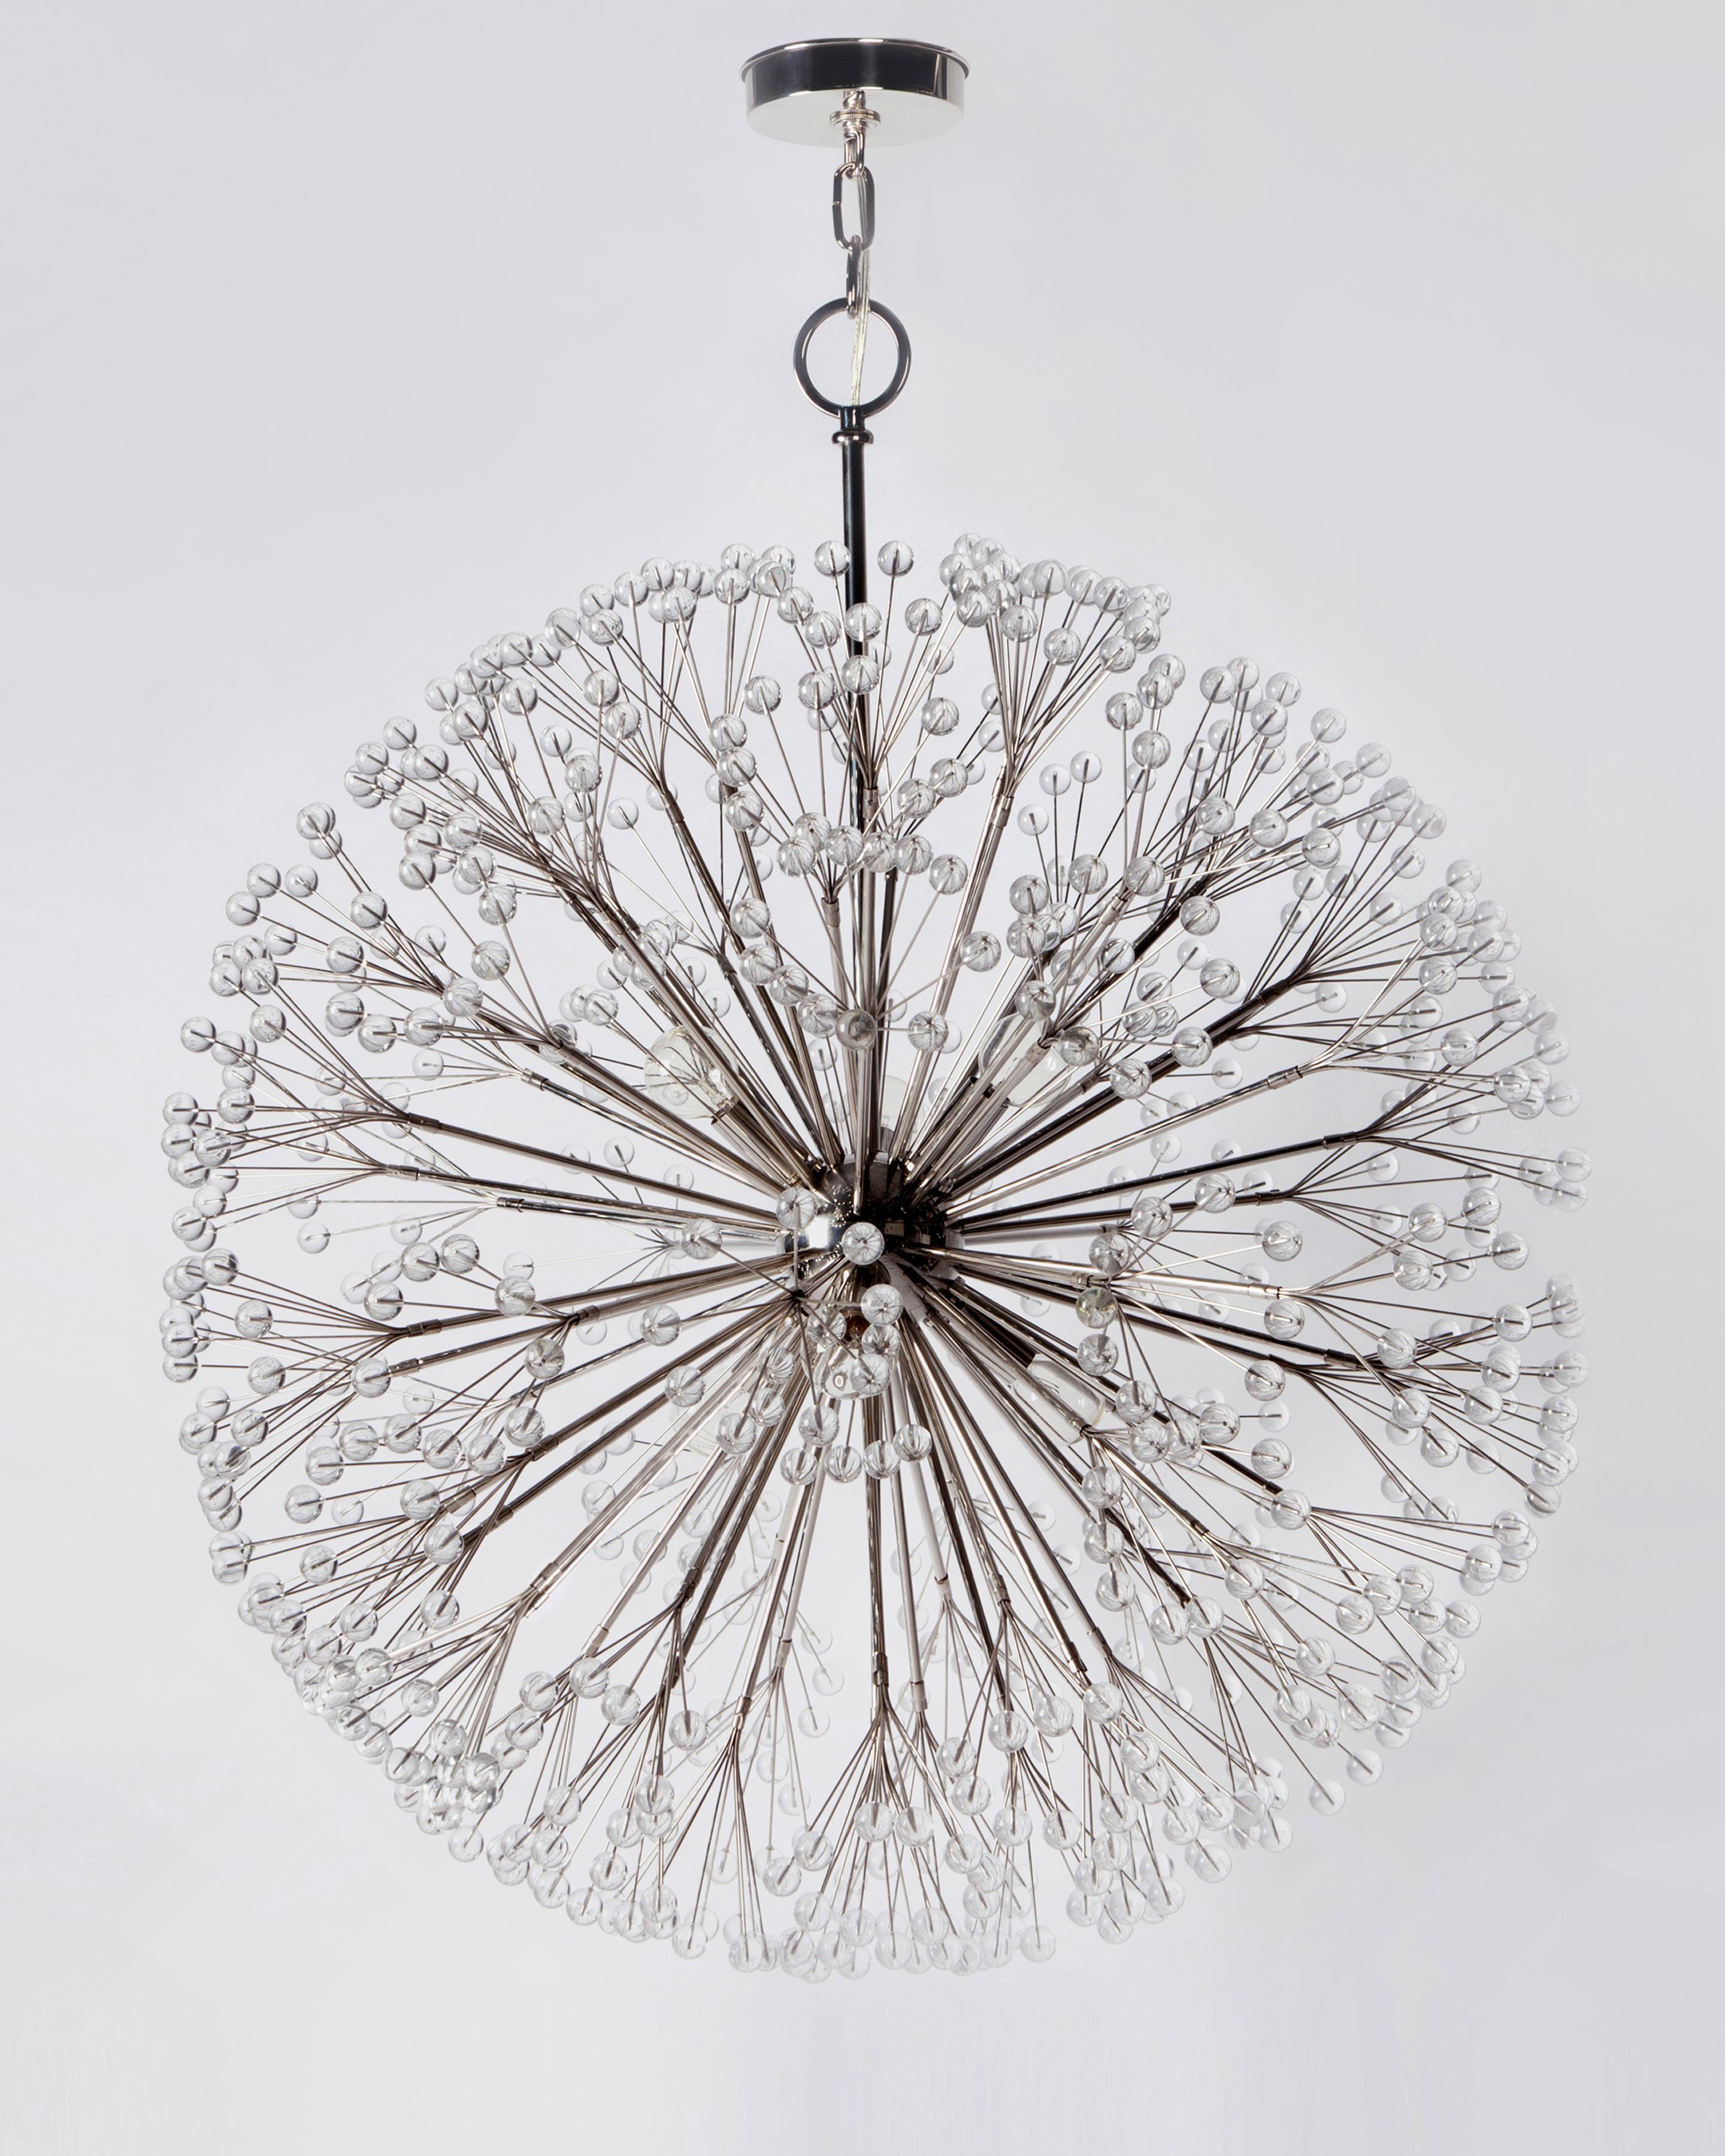 DC4610.32
The polished nickel Dandelion 32 chandelier is a solid brass sputnik style ceiling fixture gaining its delicate and organic circular shape from sprays which emanate from a central sphere, each sprig tipped with a polished lucite ball,